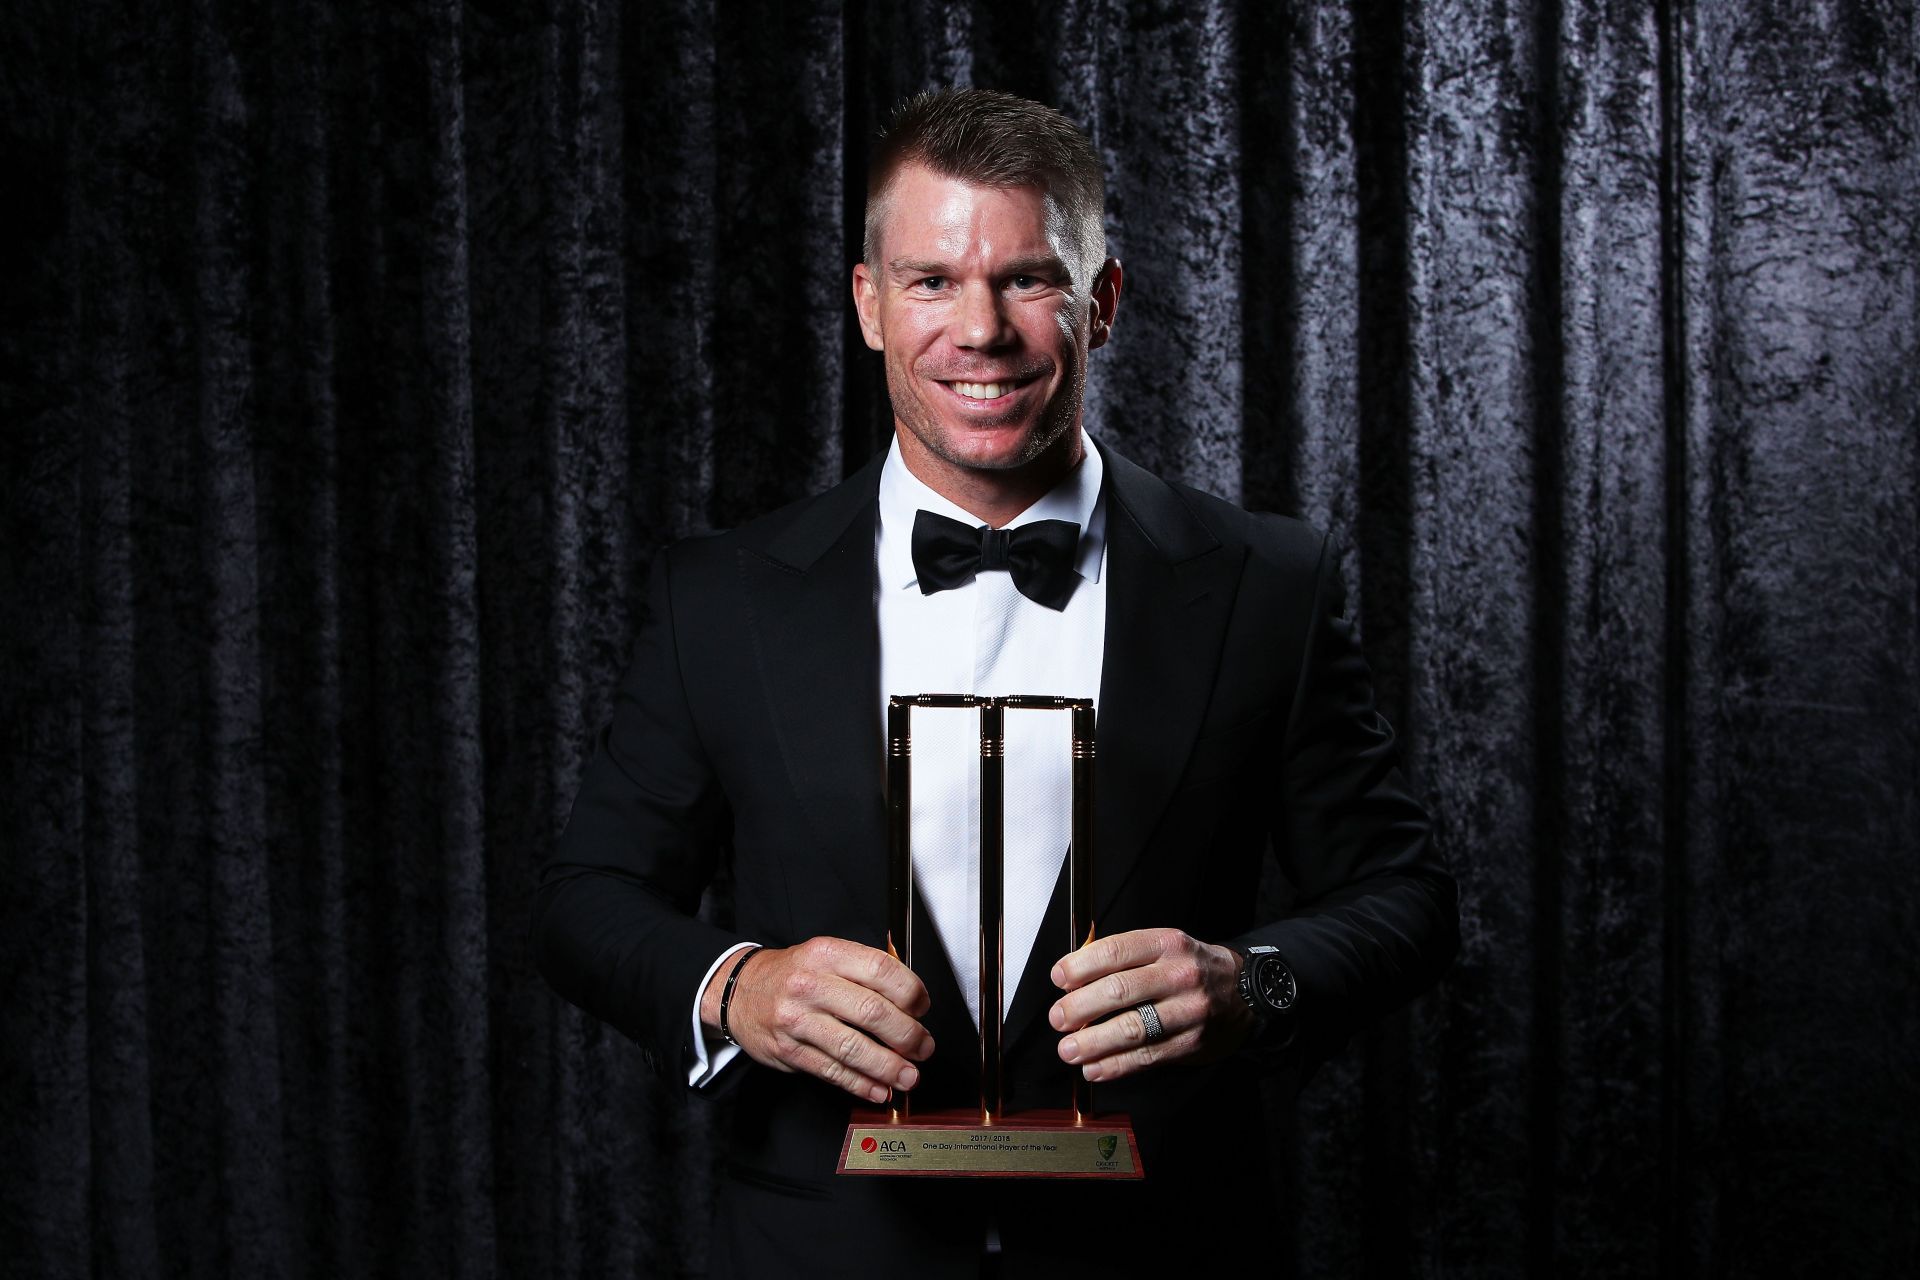 David Warner will no longer play for the Sunrisers Hyderabad in the IPL